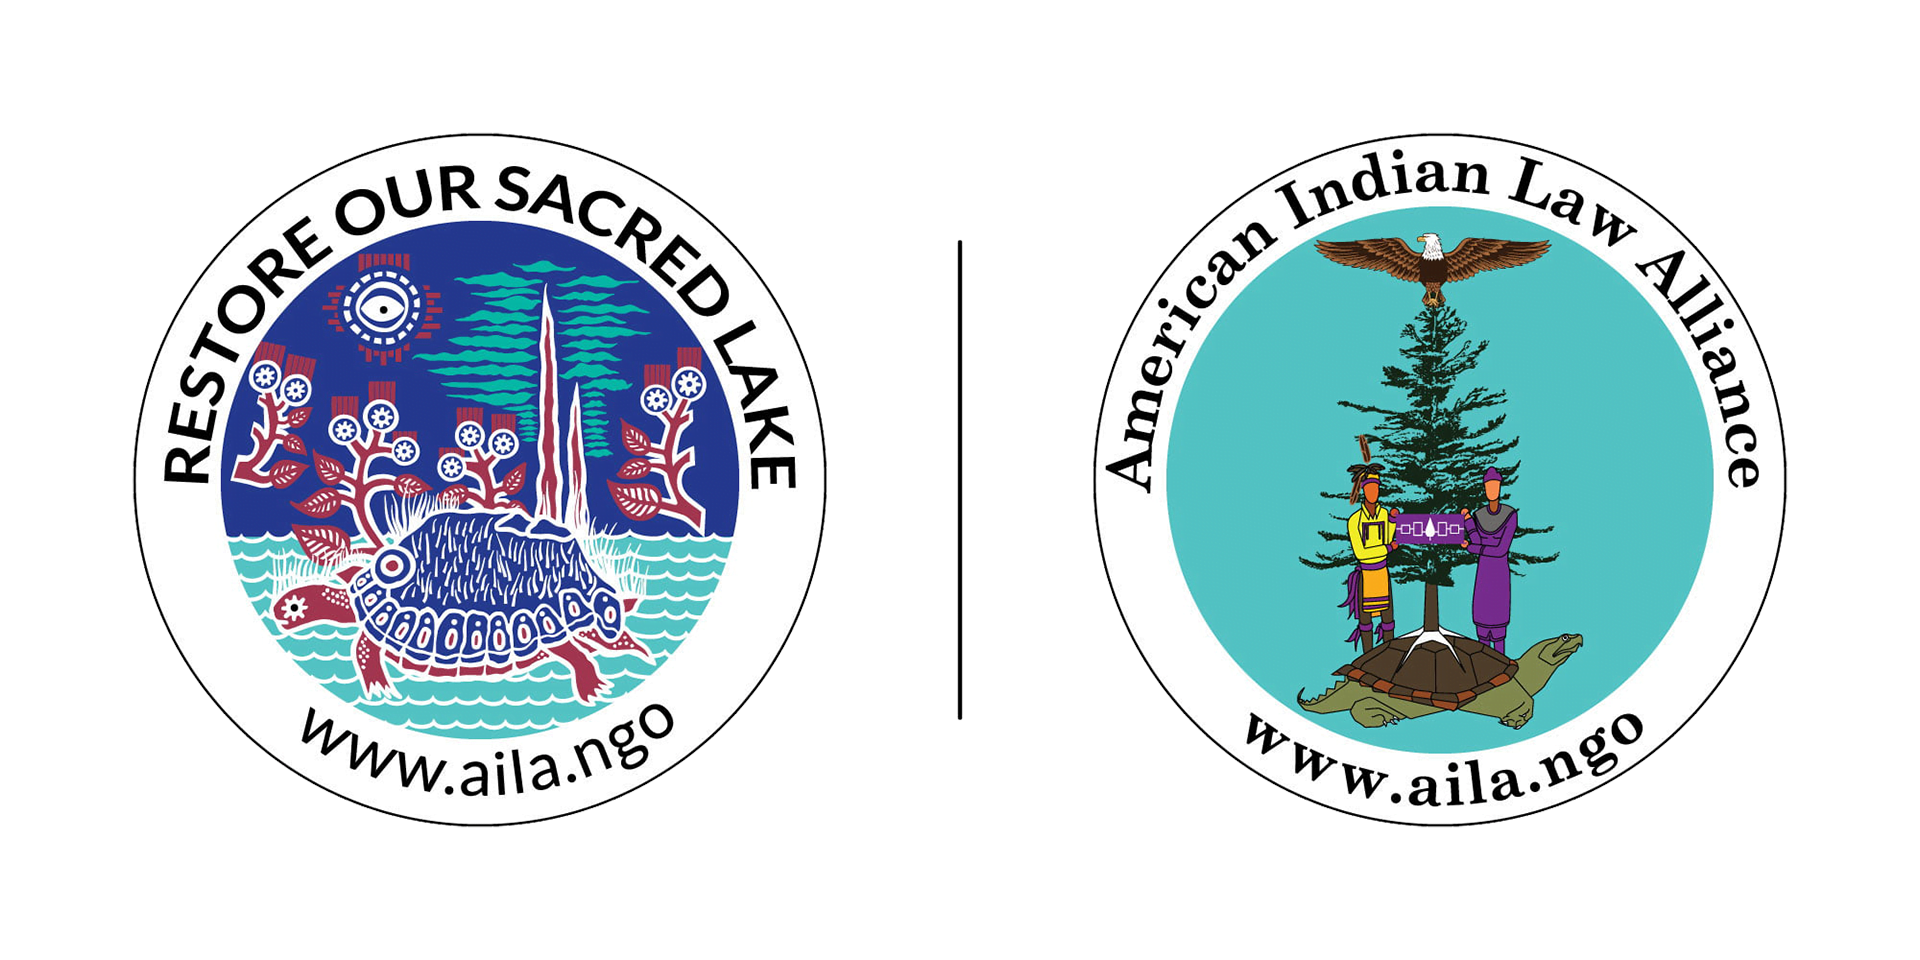 Restore Our Sacred Lake Logo and American Indian Law Alliance logos